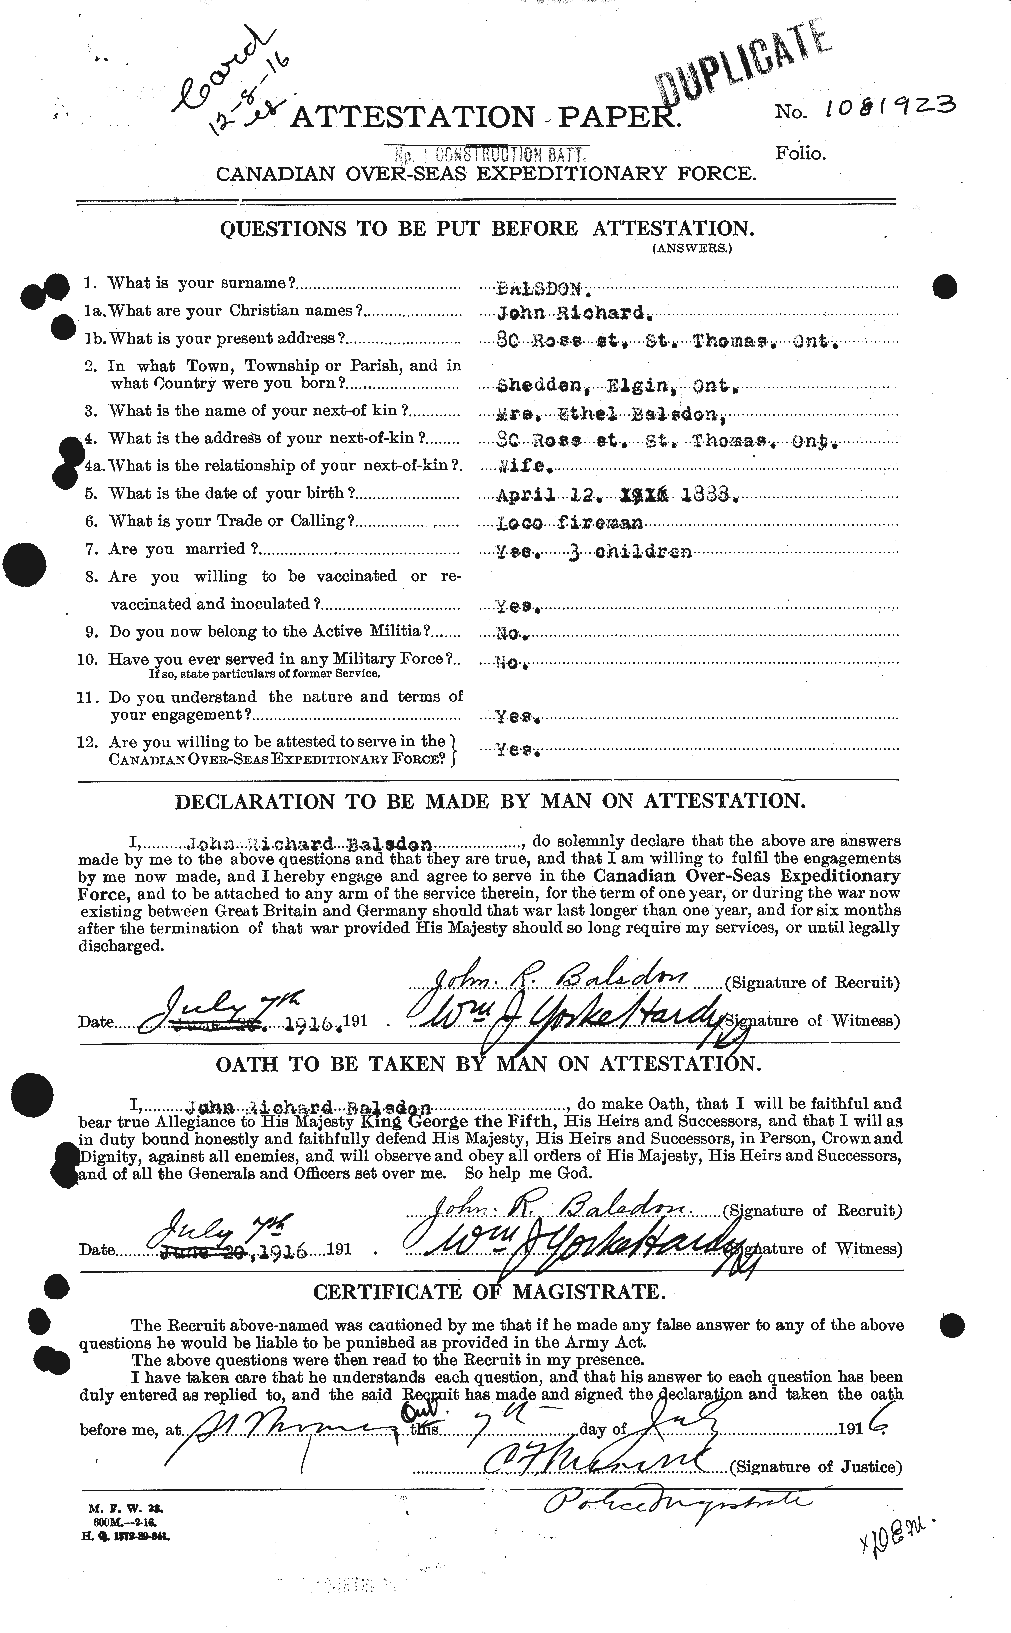 Personnel Records of the First World War - CEF 219565a